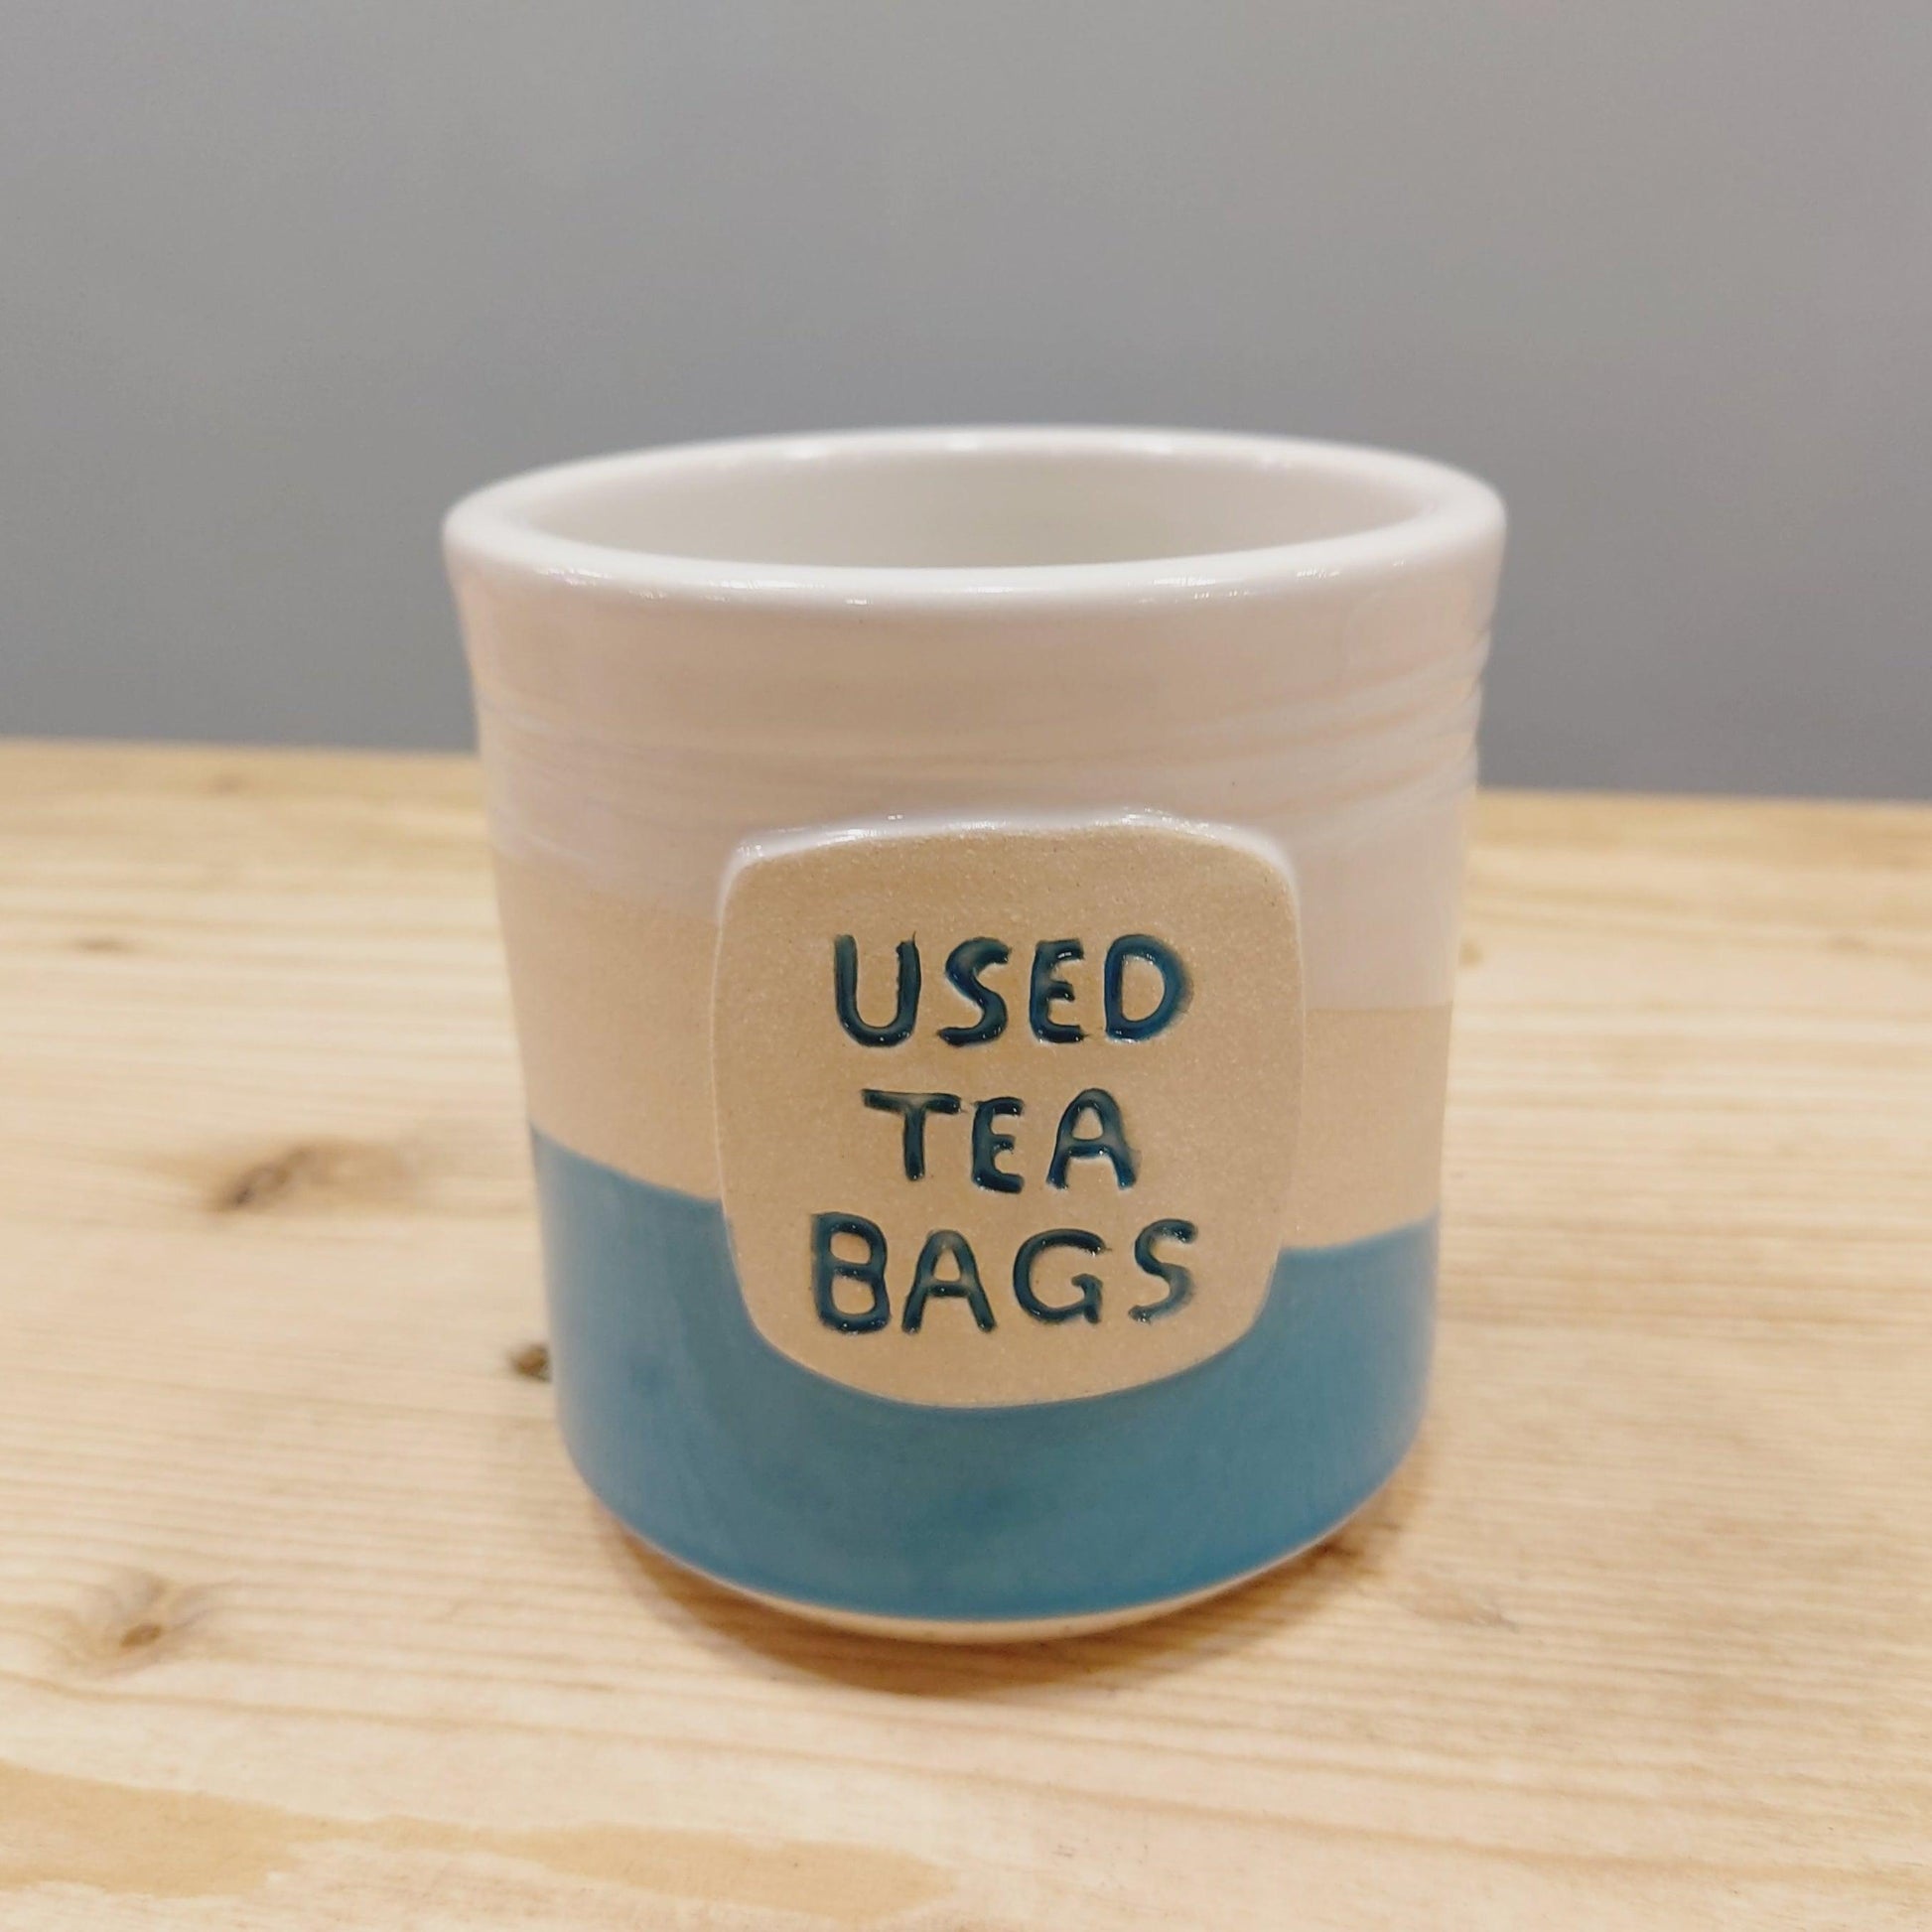 Woodford Pottery "Used Tea Bags" Container-Breda's Gift Shop